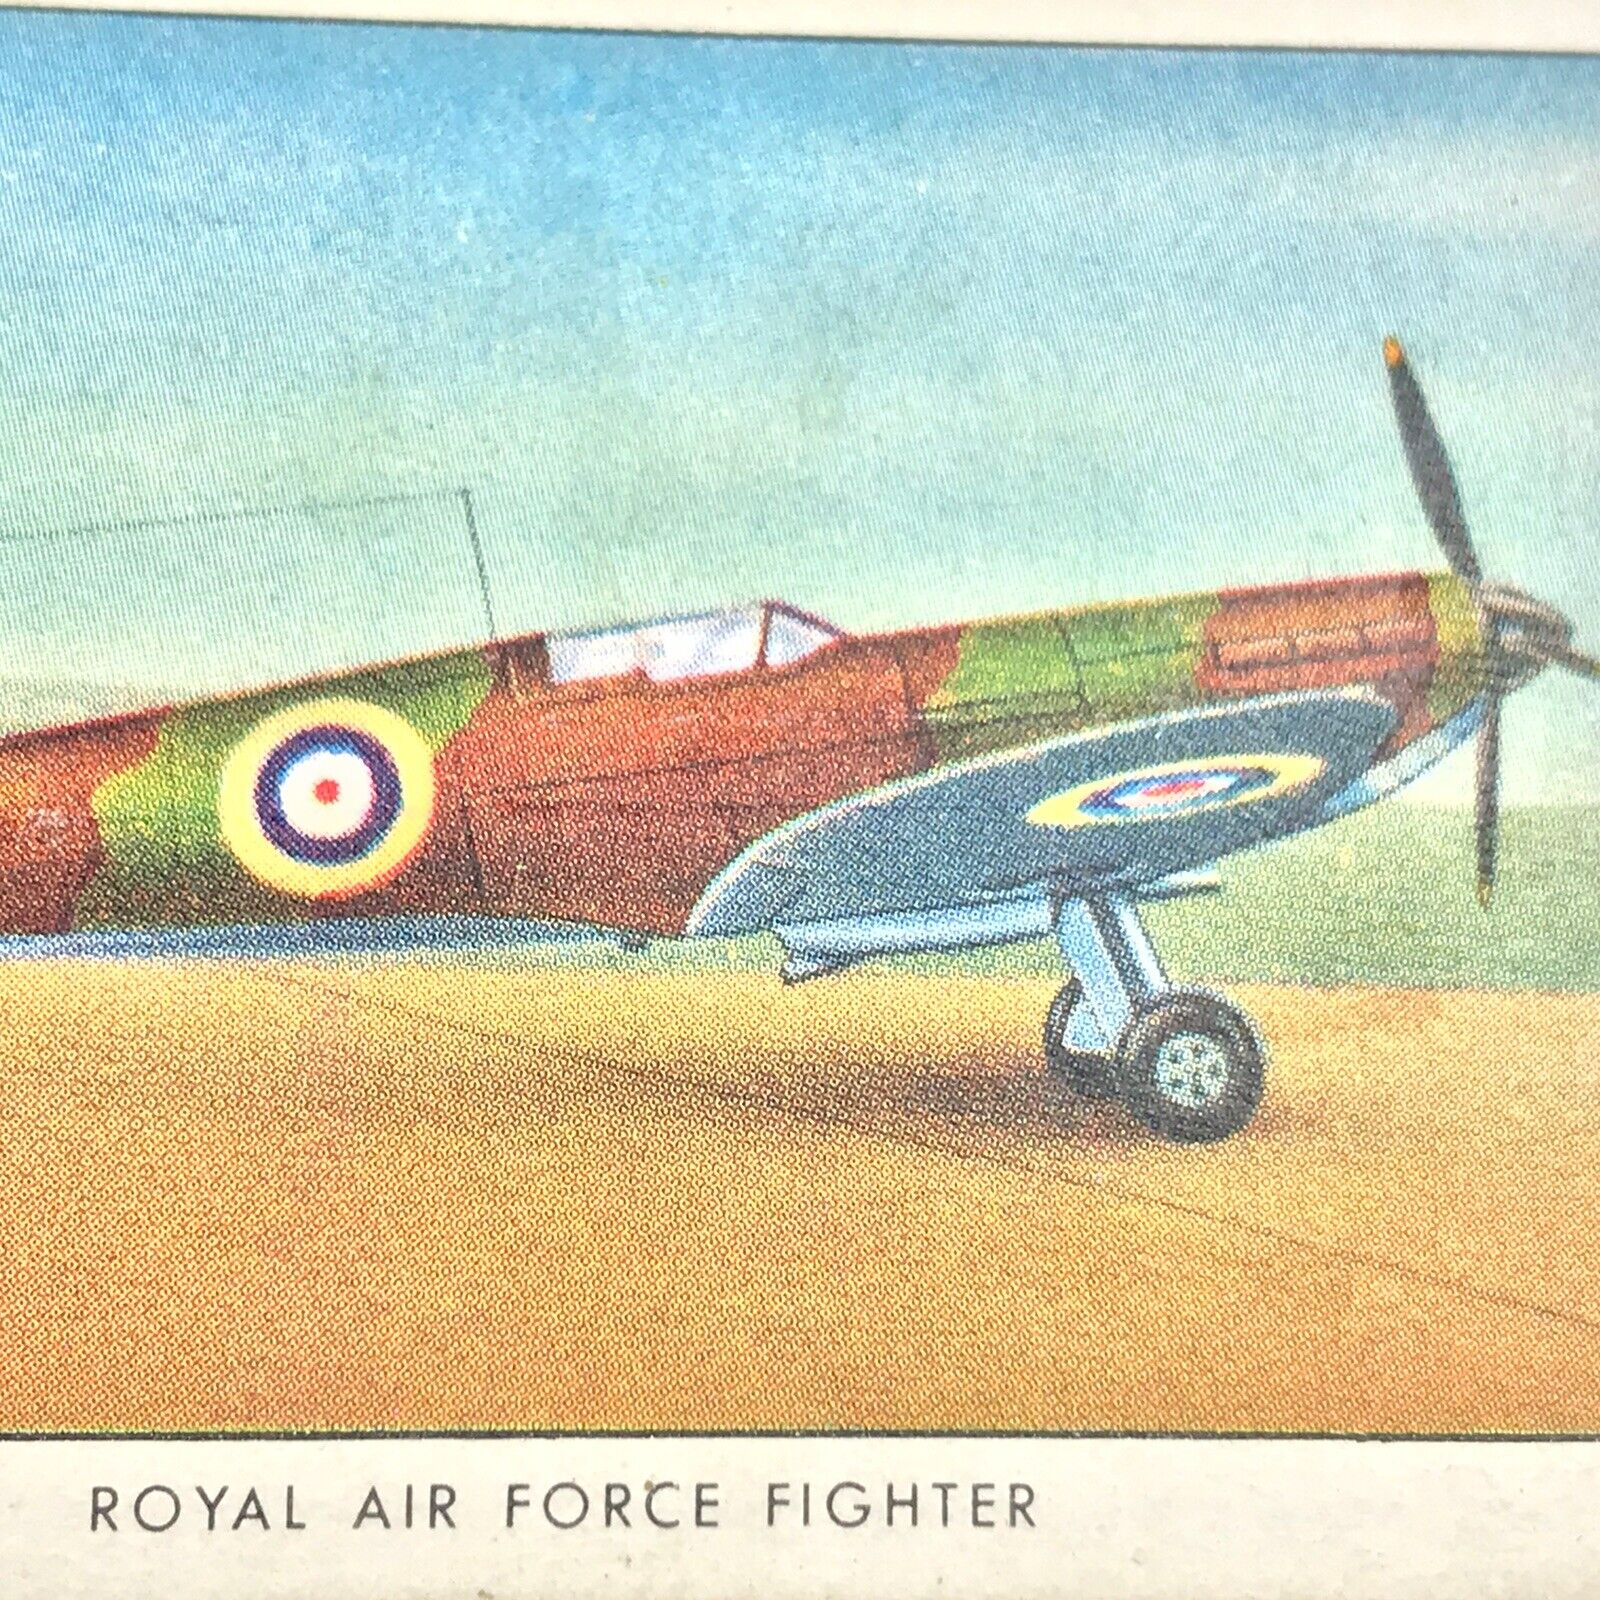 Airplane Wings Historic Royal Air Force Fighter Card Tobacco Cigarette Original